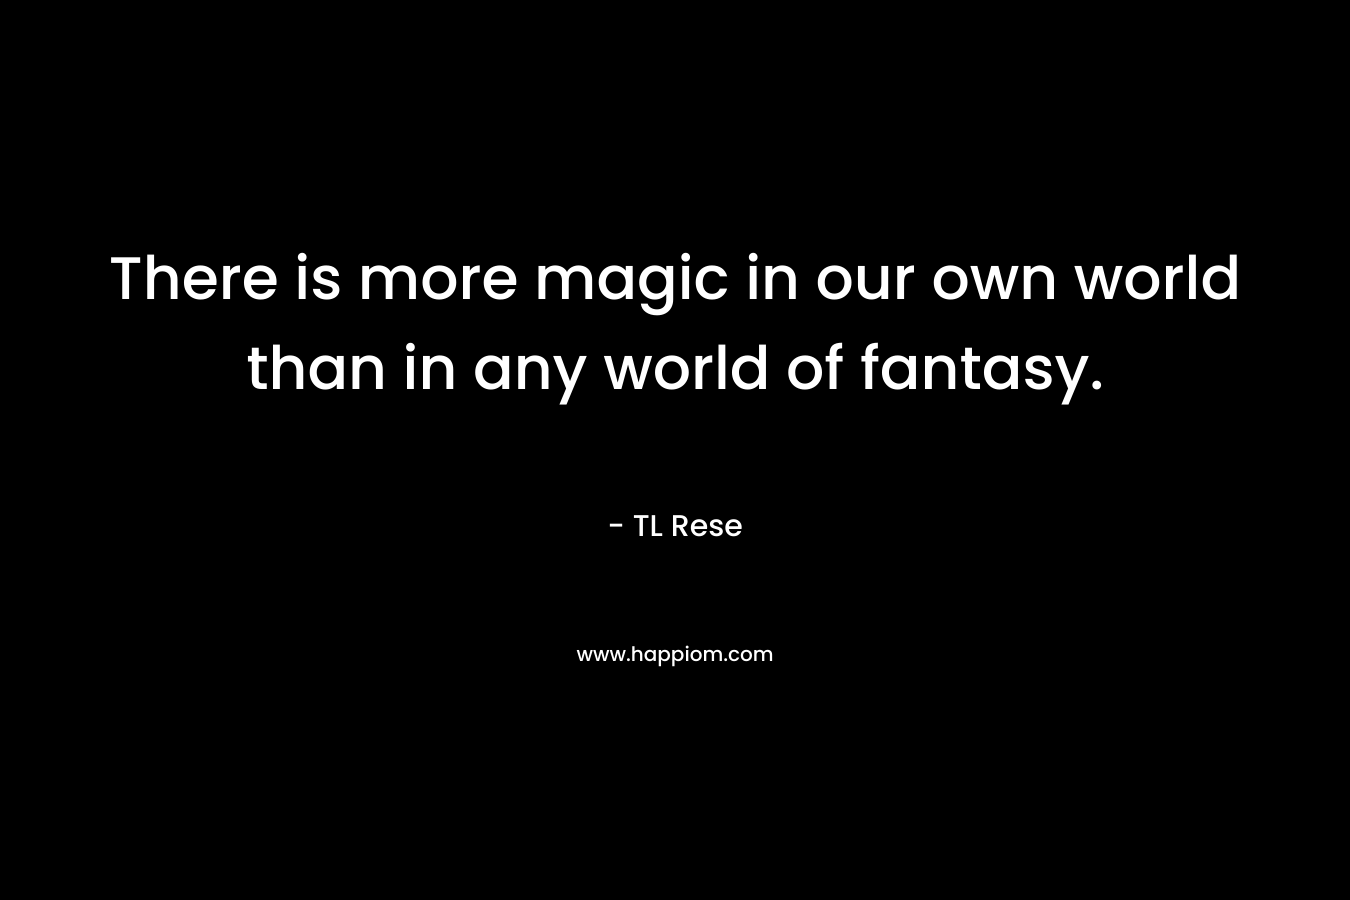 There is more magic in our own world than in any world of fantasy. – TL Rese